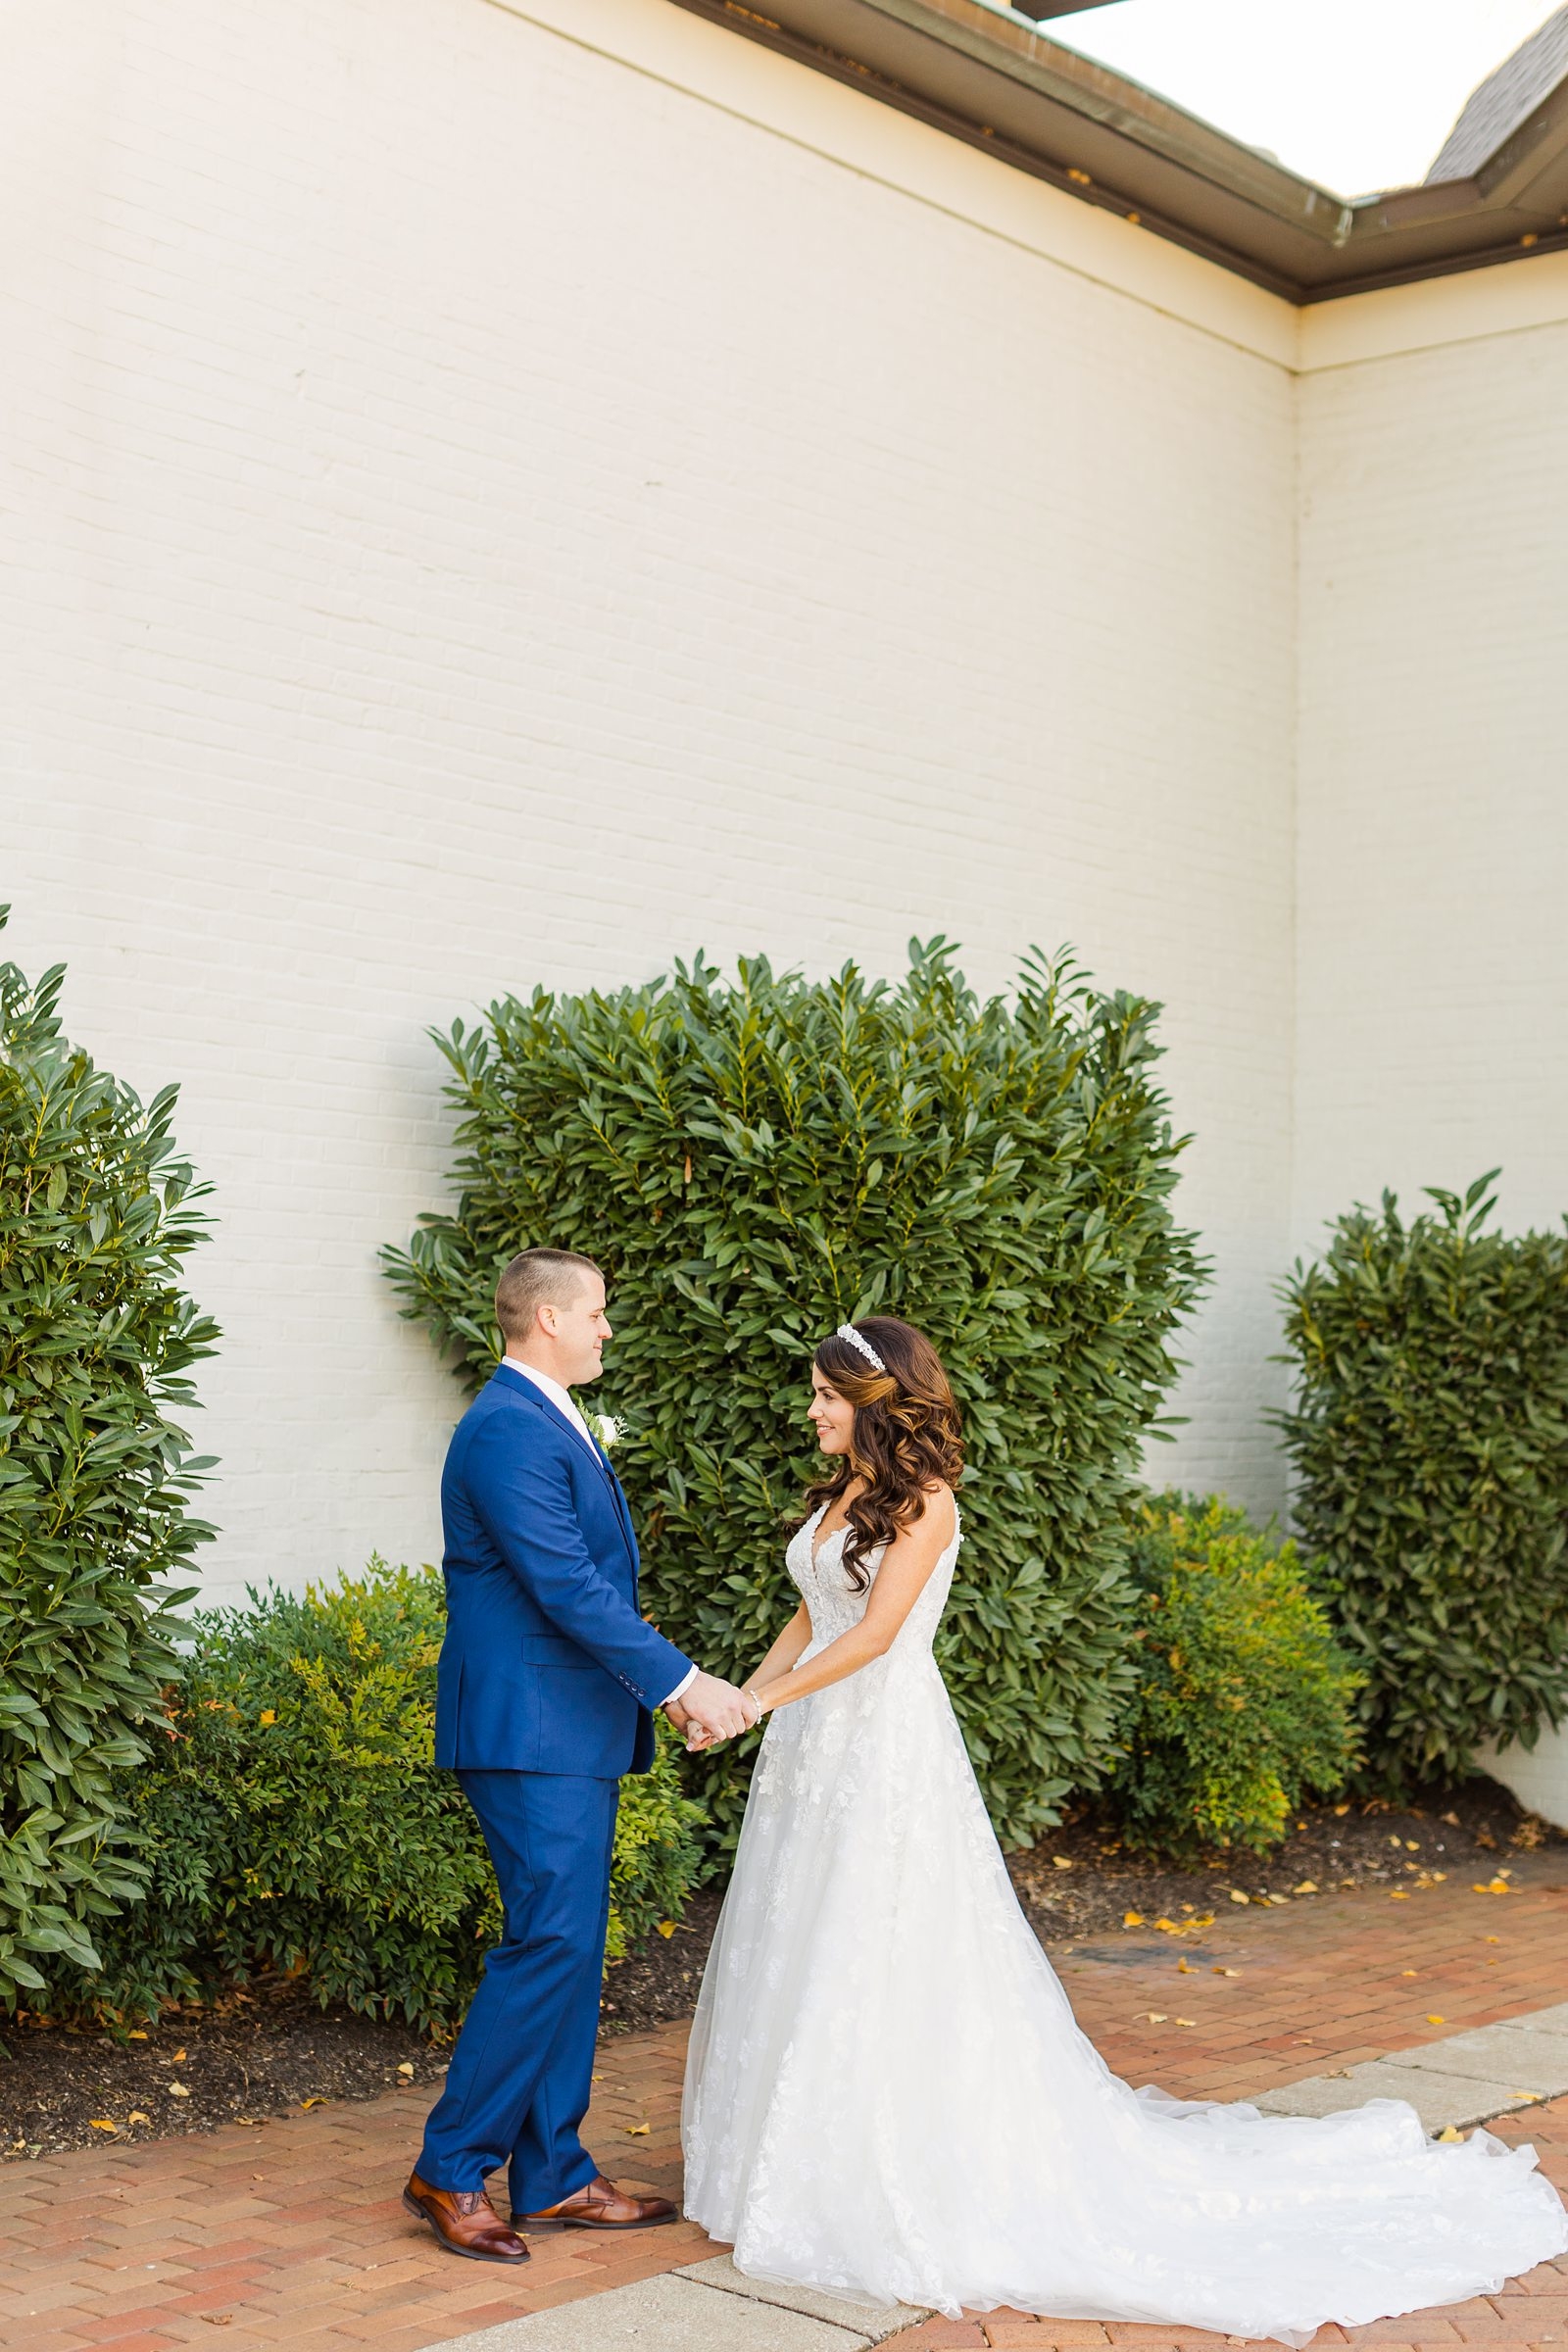 An Evansville Country Club Wedding | Abby and Wes | 80.jpg